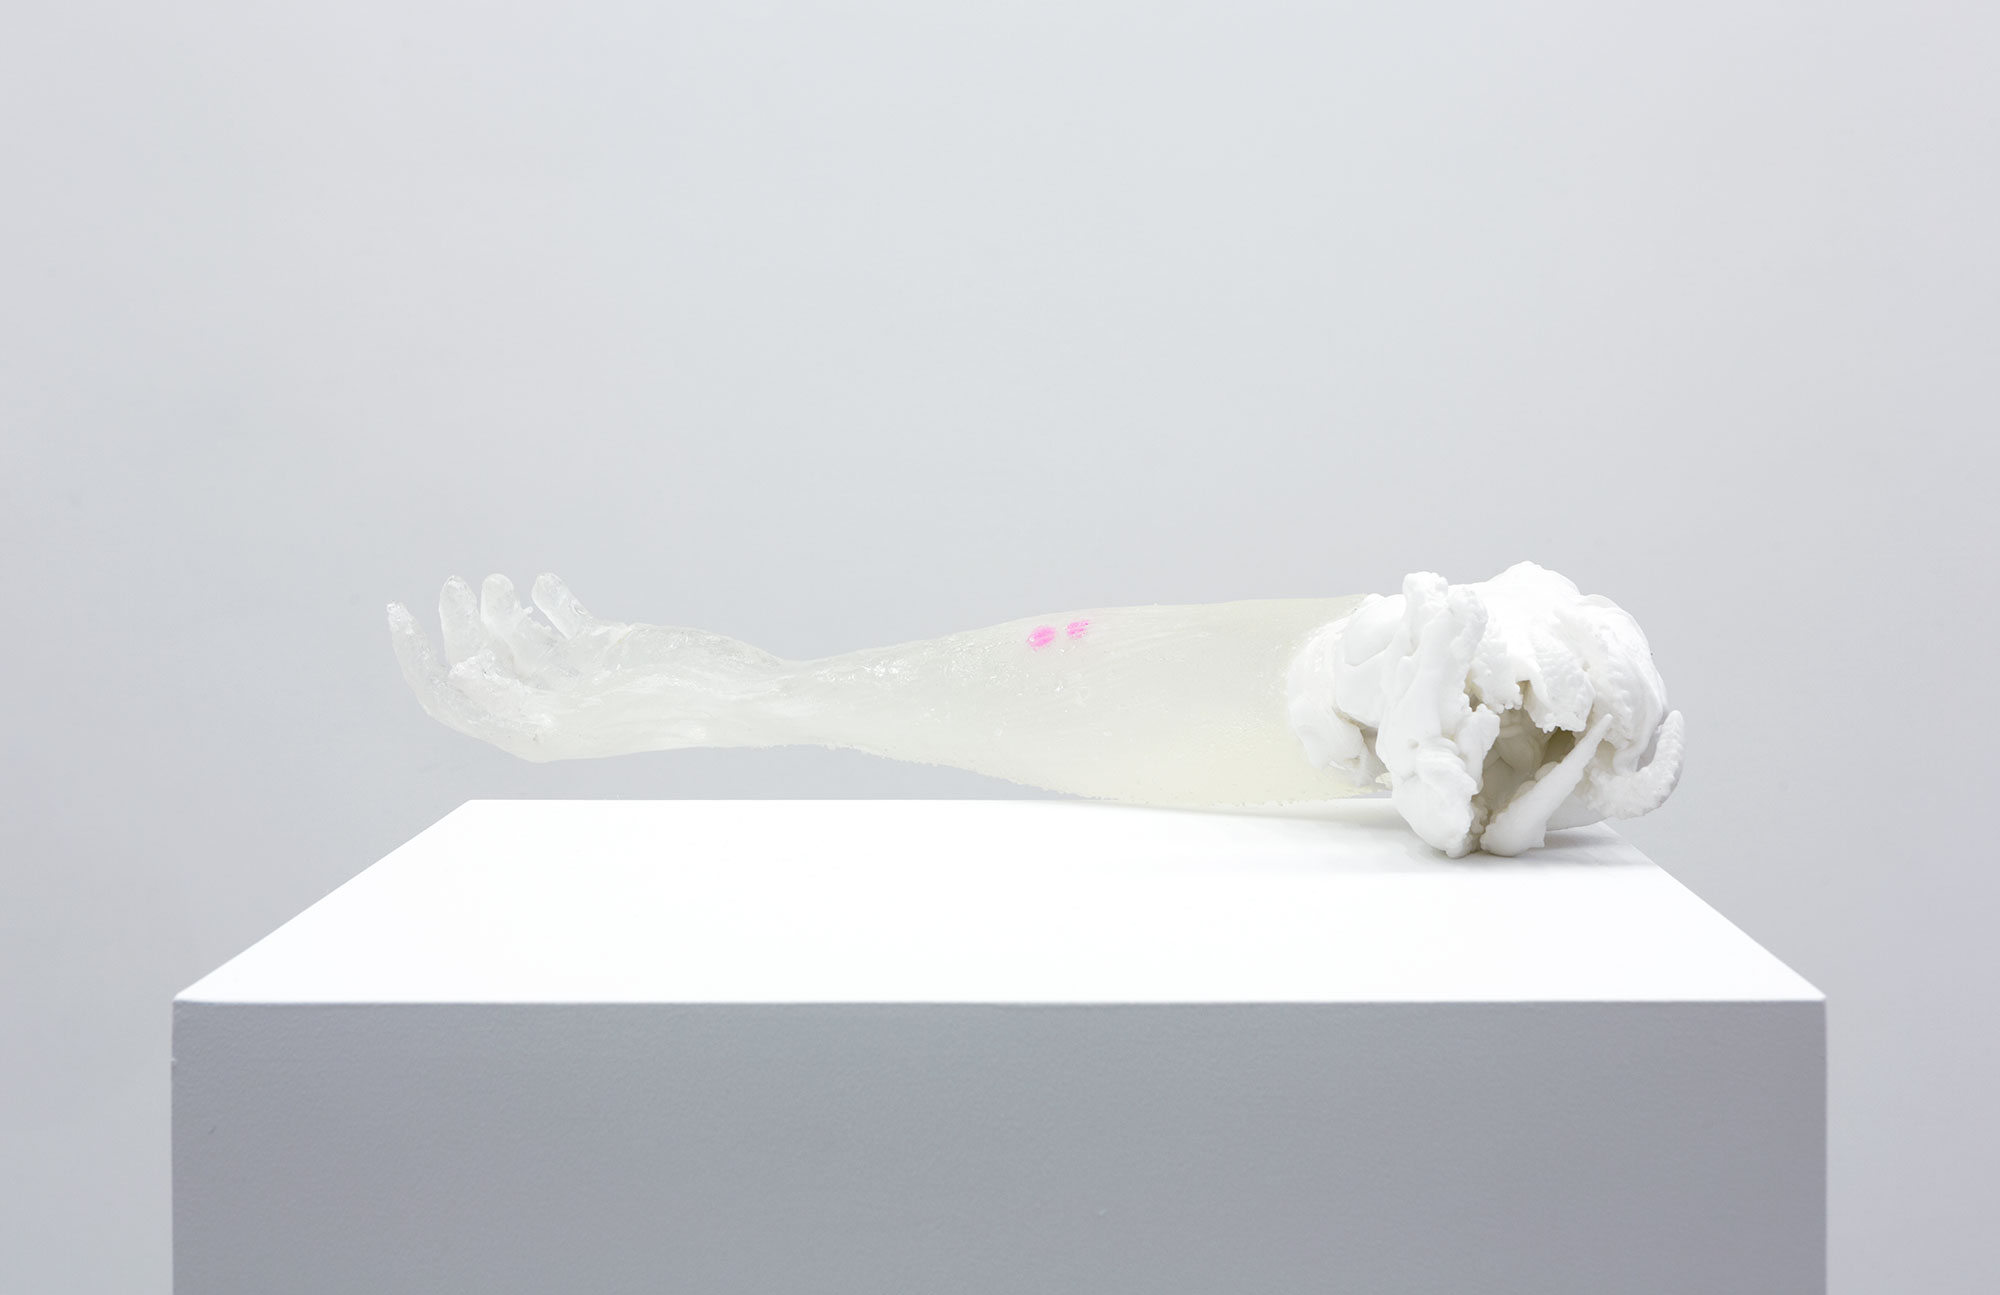 "Everything we’ve worked for - www.youtube.com/watch?v=X85jy2w97-A", 2016, Gel 10 silicone, alginate, water, epoxy resin, pigment, dimensions variable